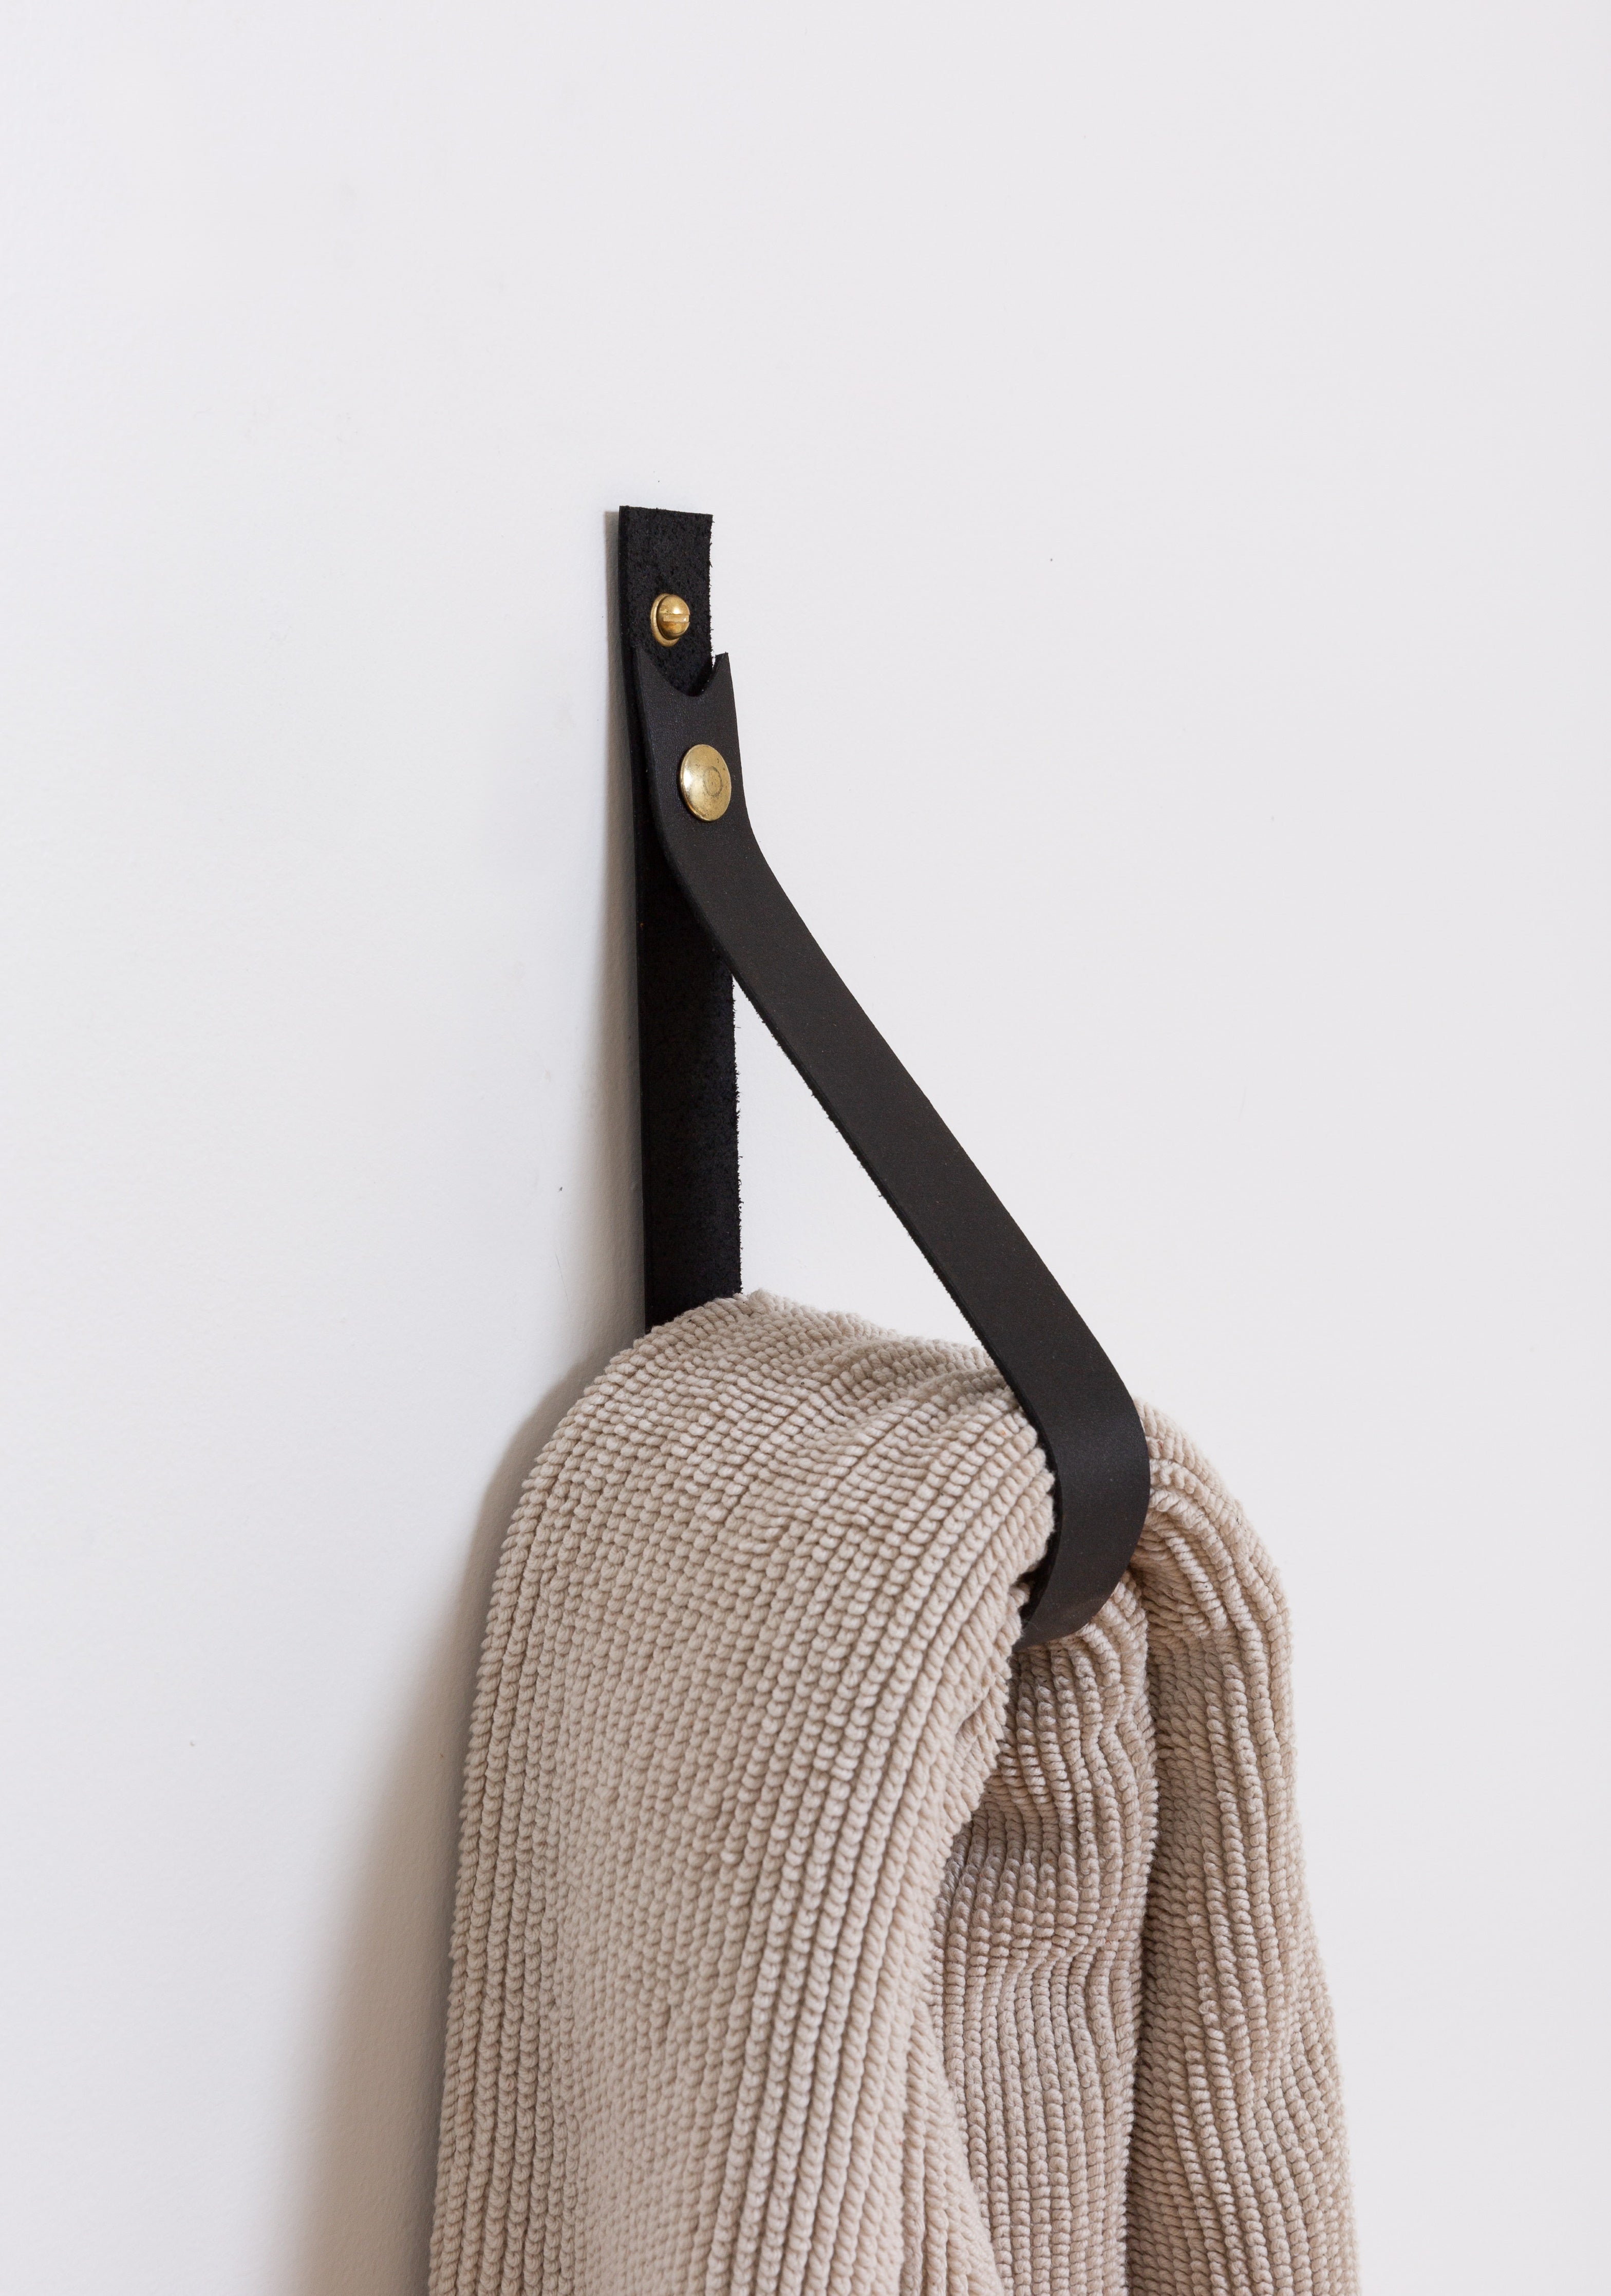 Swivel snap fastener with leather beige bag strap on a wooden